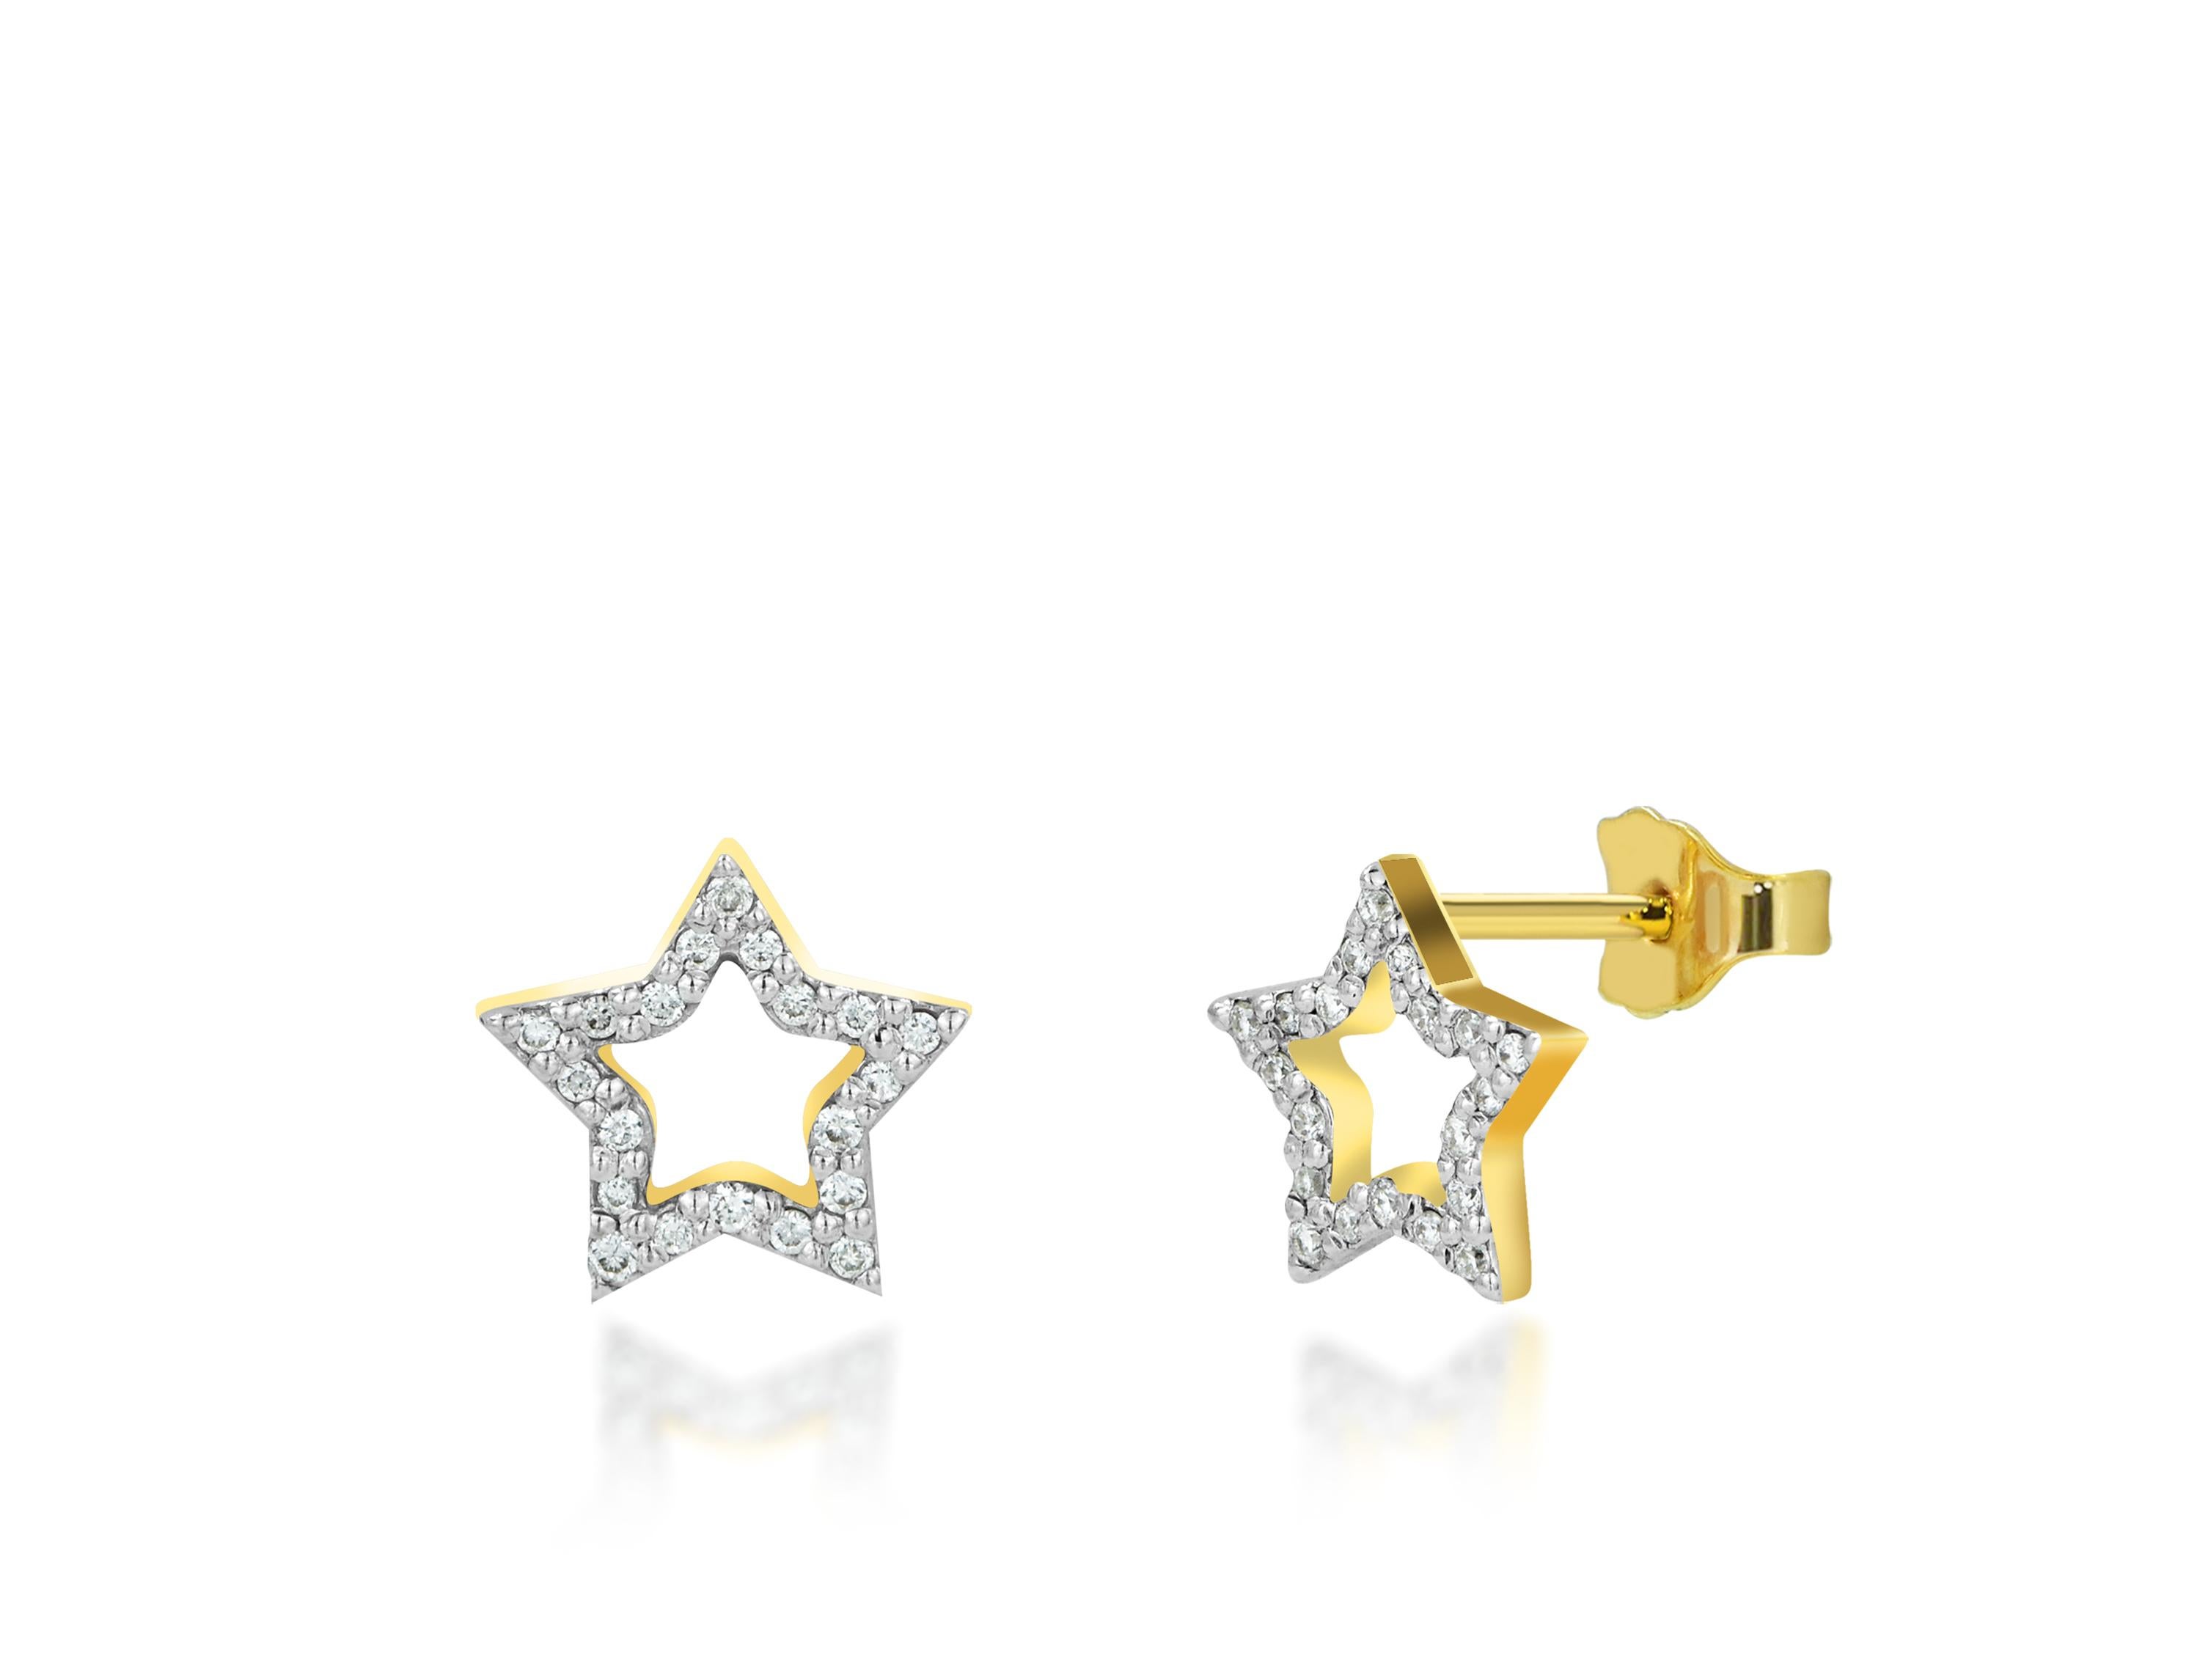 Tiny Diamond Star Stud Earrings  18k Solid Gold  Star Earrings  Pave Diamond  Natural Diamond Everyday Tiny Earrings.

These Dainty Stud Earrings are made of solid 18k gold featuring shiny brilliant round cut natural diamonds set by master setter in